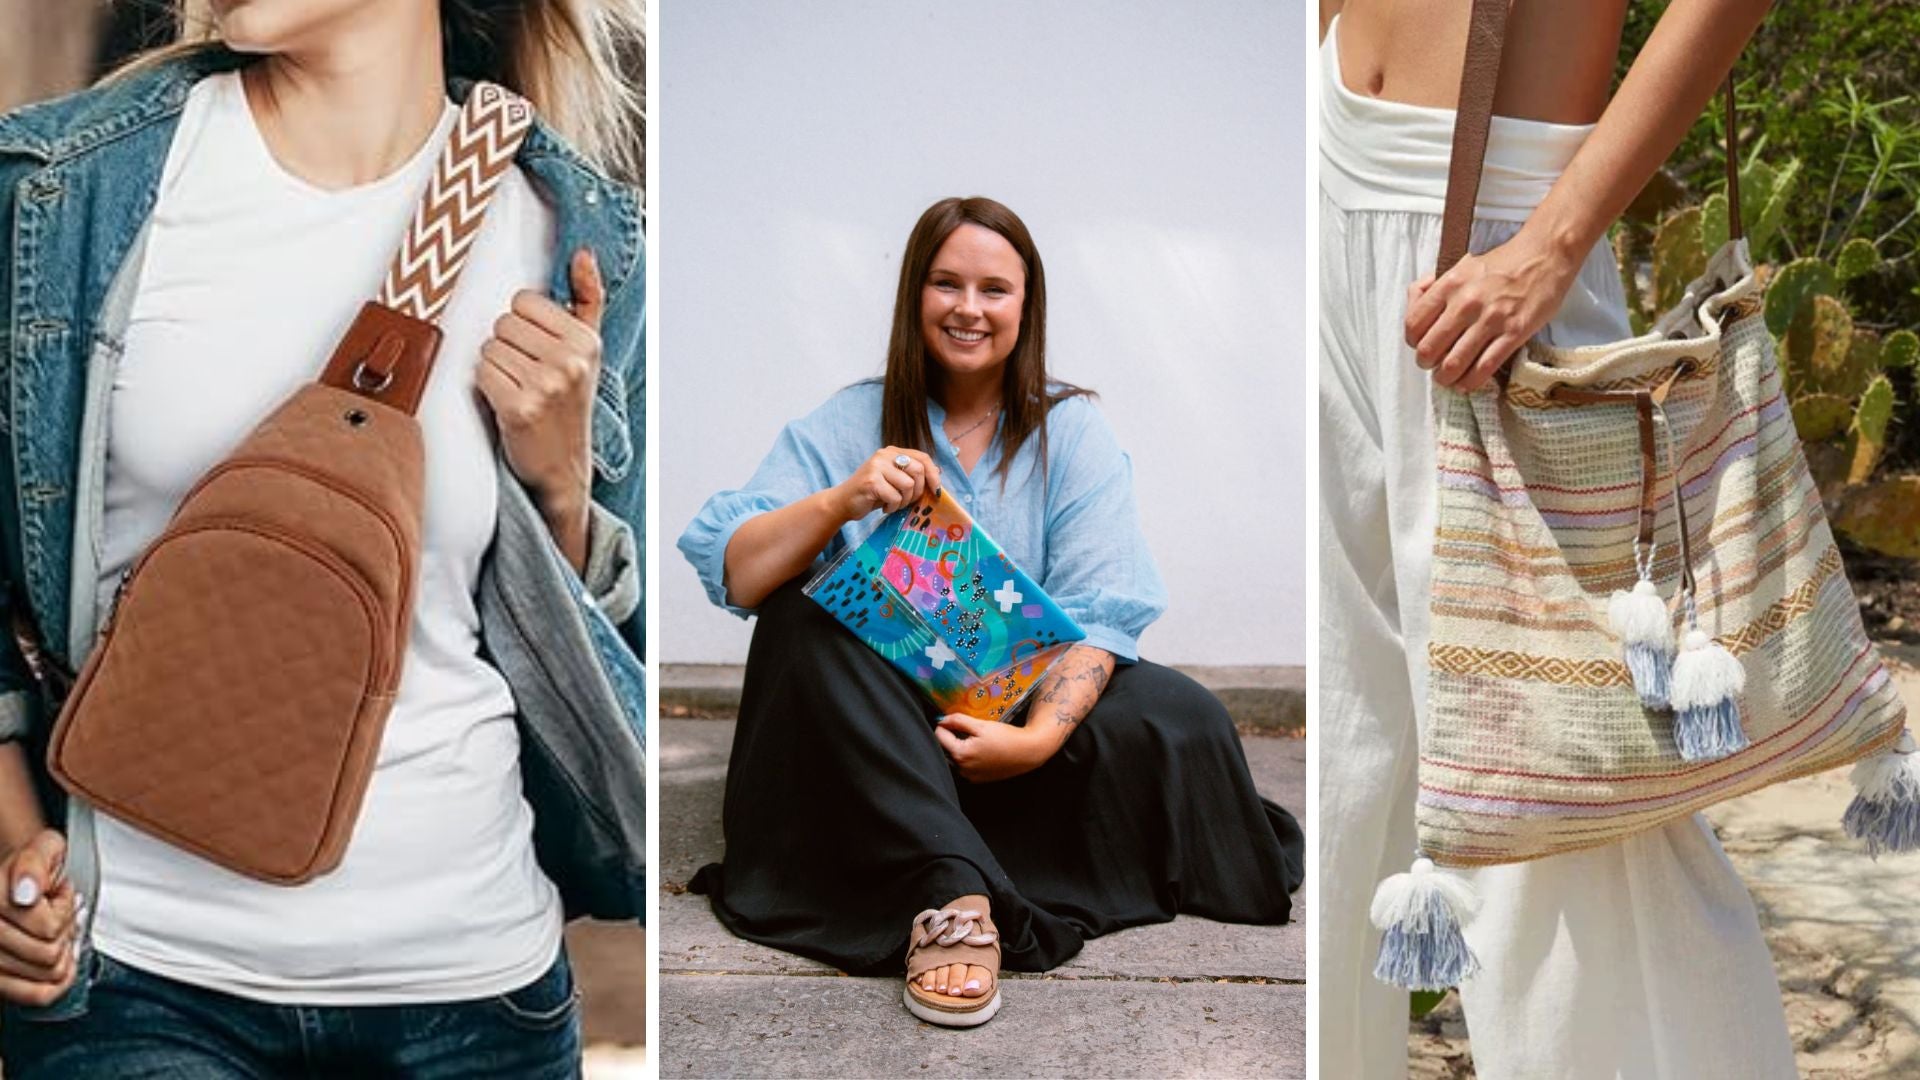 From Tote To Clutch: DIY Bag Projects For A Stylish Summer